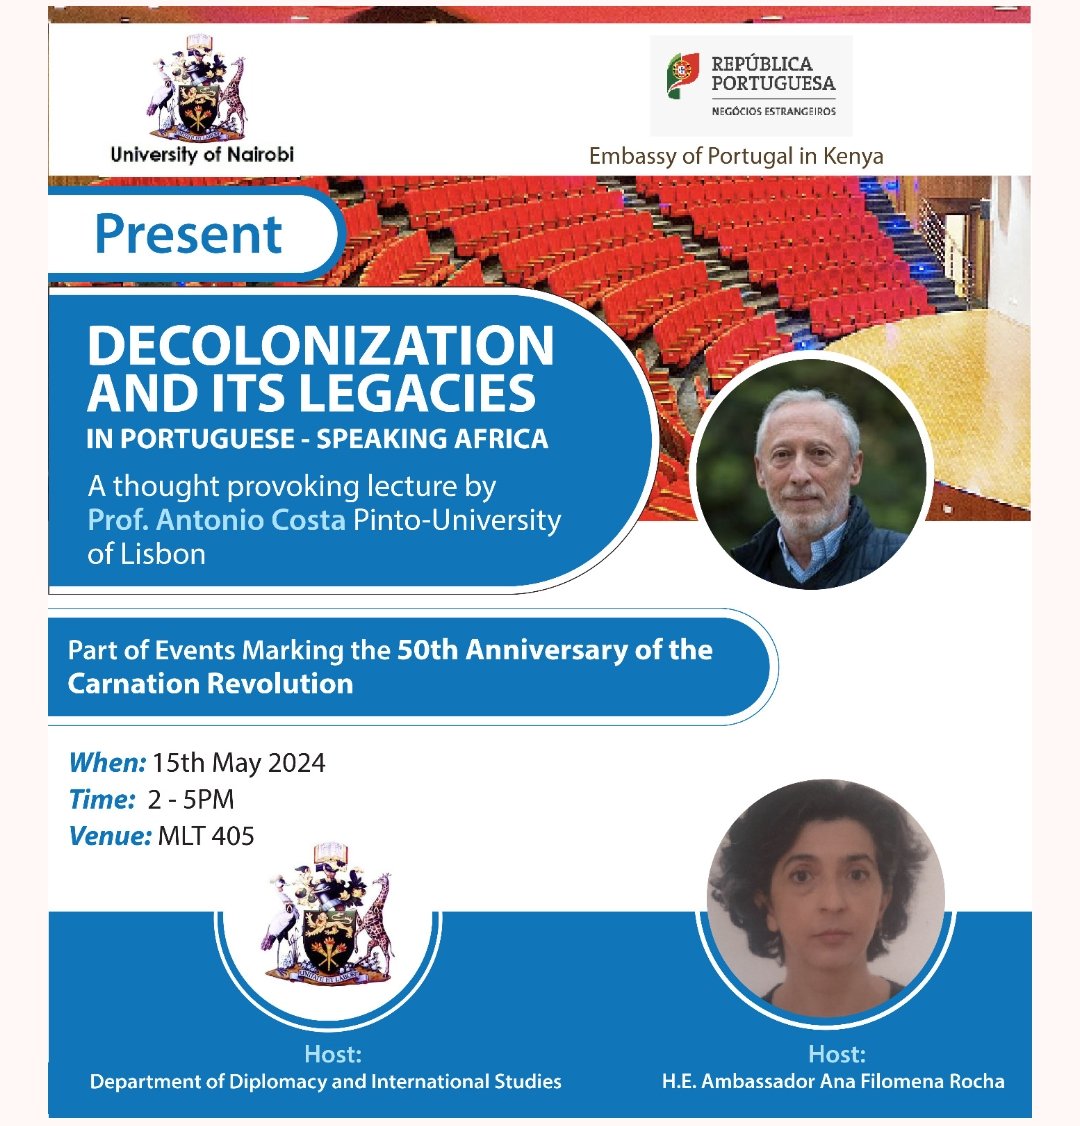 Hours away! Don't miss out on this enlightening lecture! Prof. Costa will explore the profound impacts of decolonization, offering deep insights into both historical and contemporary implications for former Portuguese territories. @ddis_uon @uonbi